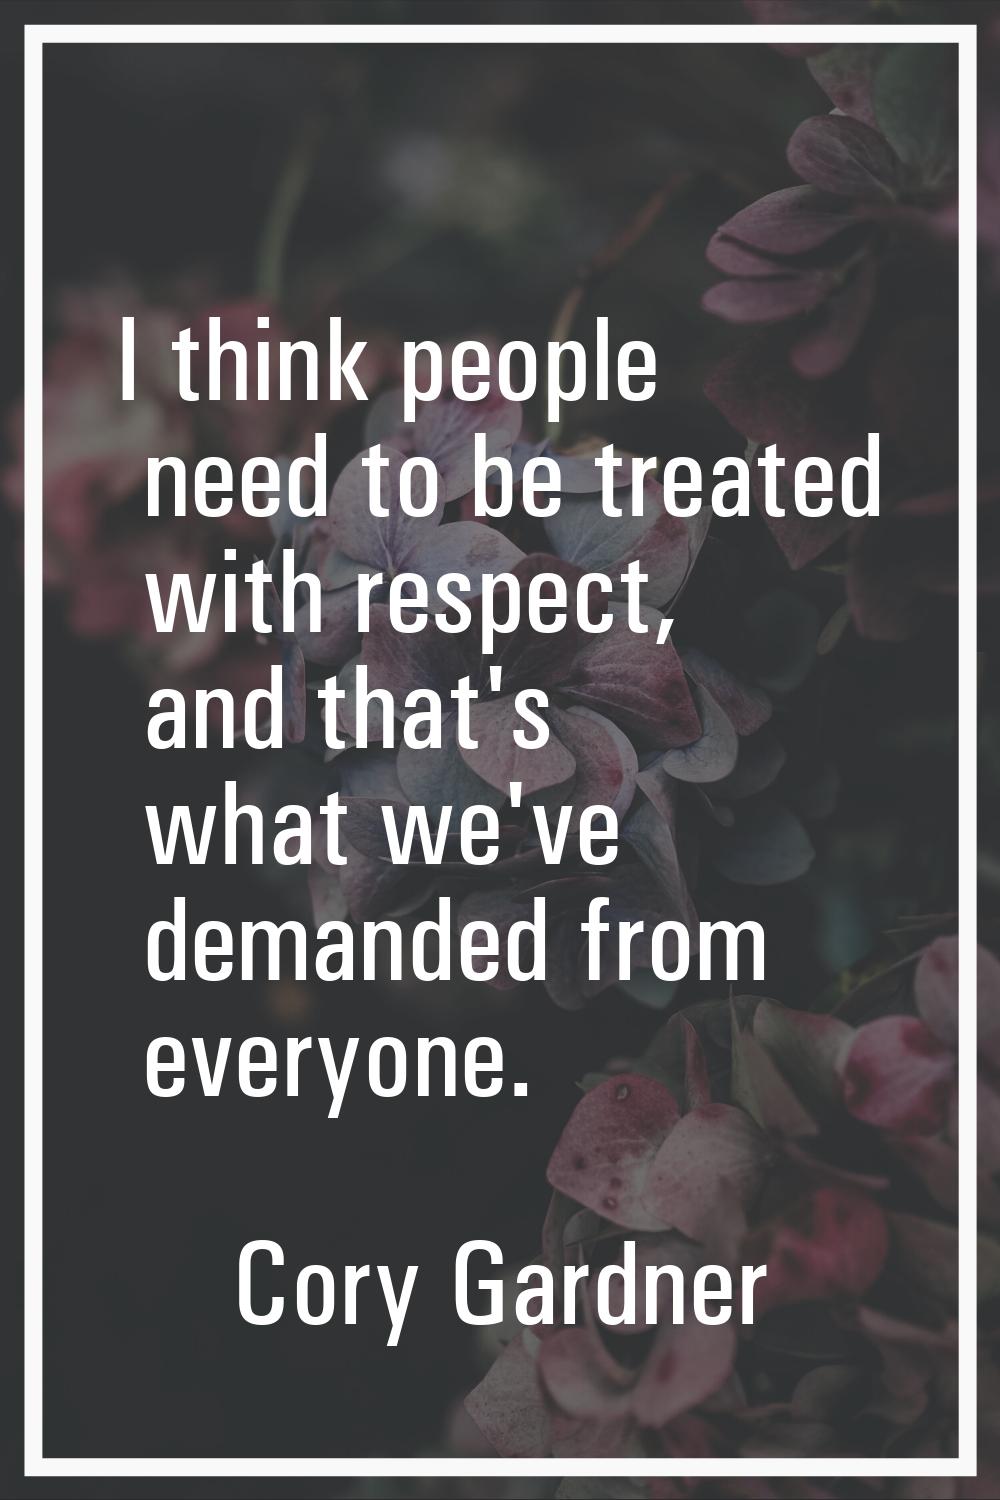 I think people need to be treated with respect, and that's what we've demanded from everyone.